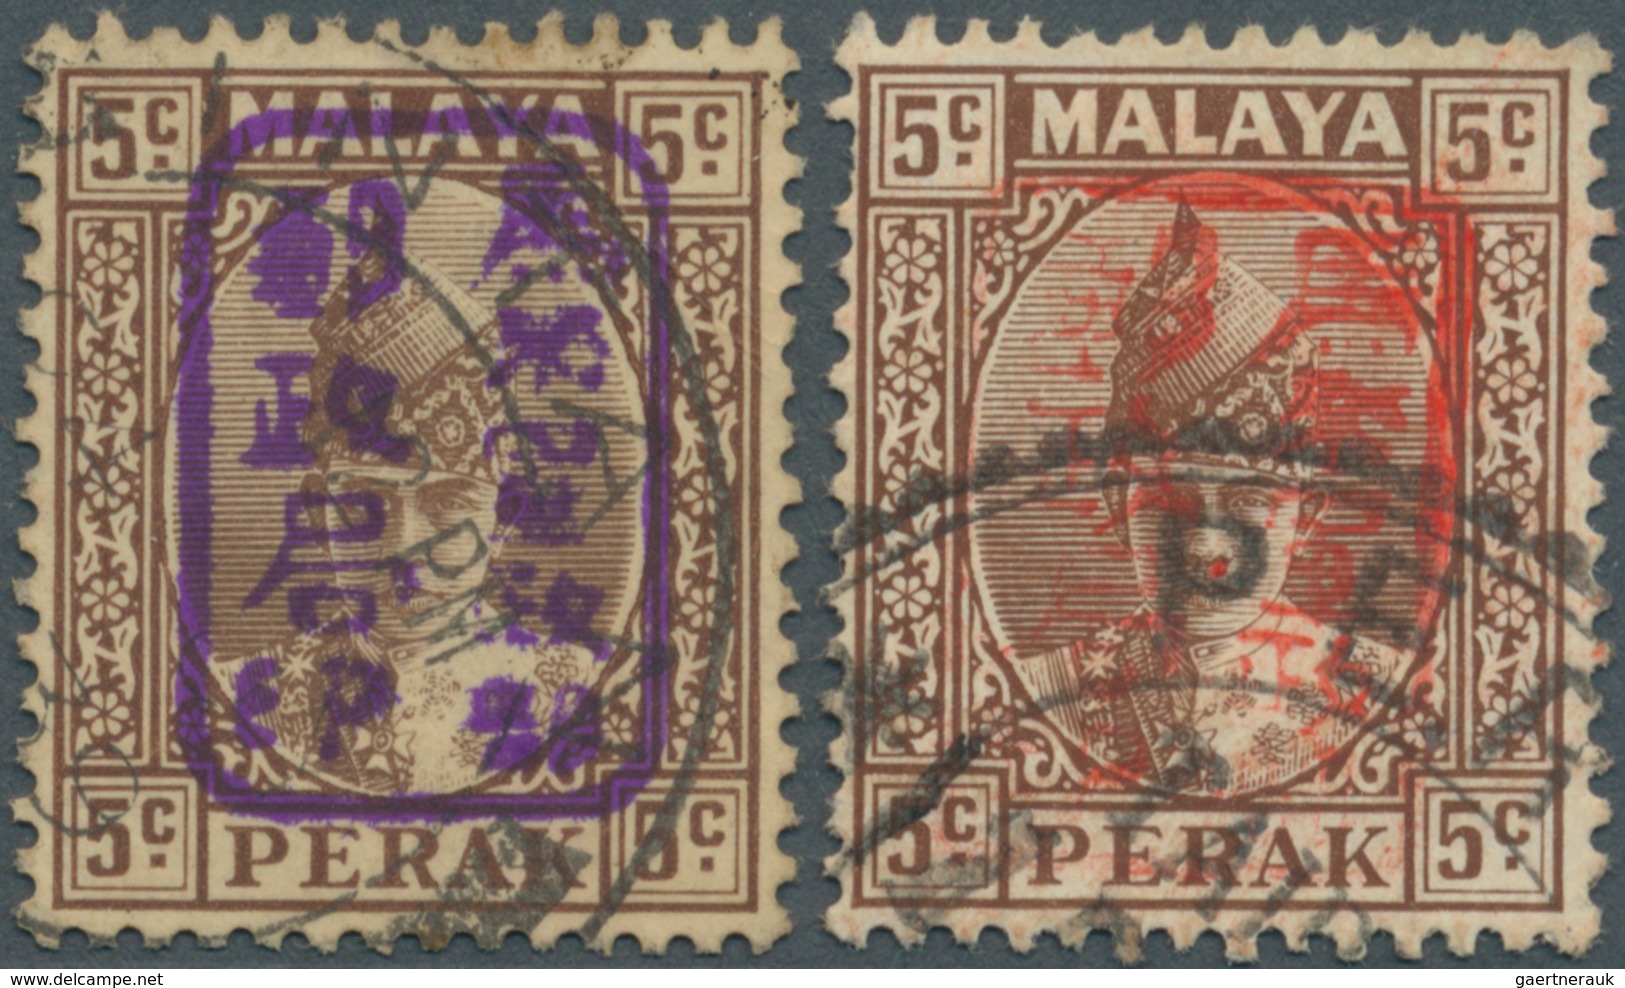 06793 Malaiische Staaten - Perak: Japanese Occupation, 1942, General Issues, Small Seal Ovpts: 5 C., Viole - Perak